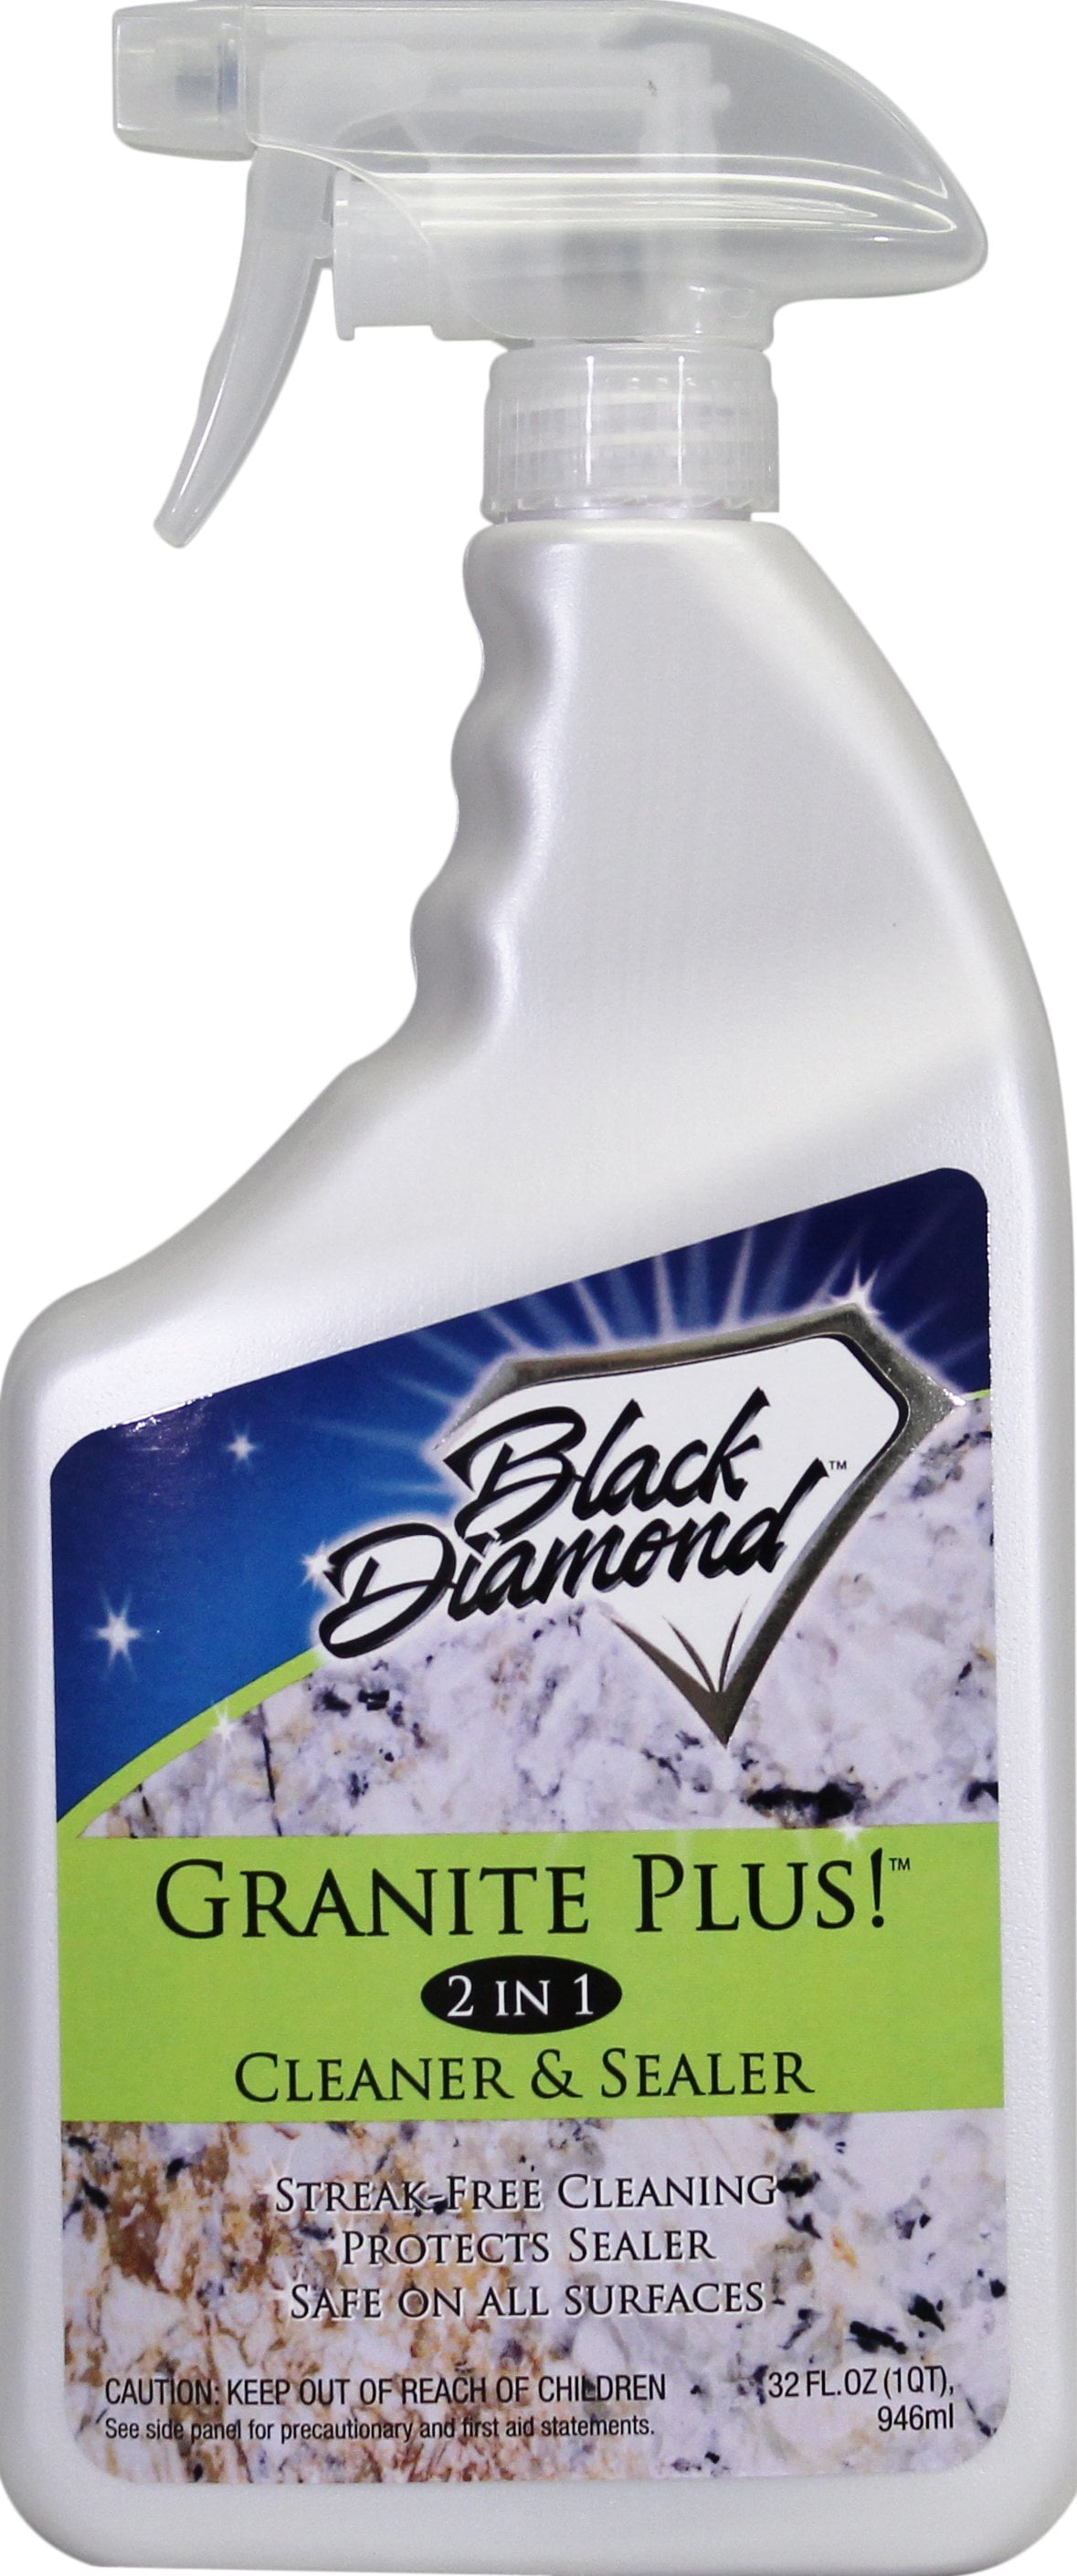 Marble Tile Floor Cleaner Concentrate, Black Diamond Marble And Tile Floor Cleaner